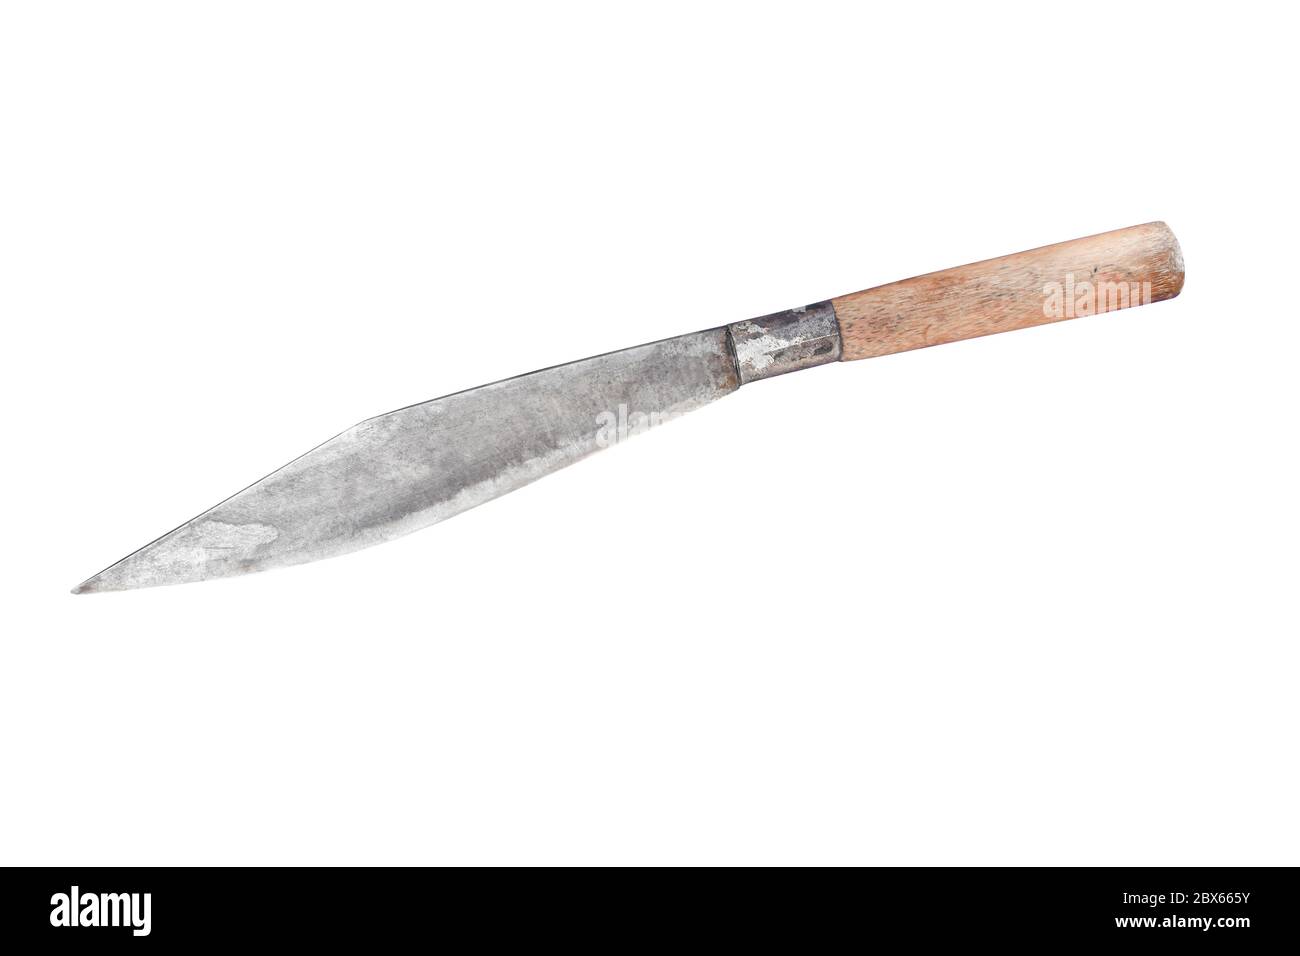 kitchen knife with bamboo handle on a white background. Object with clipping path. Stock Photo